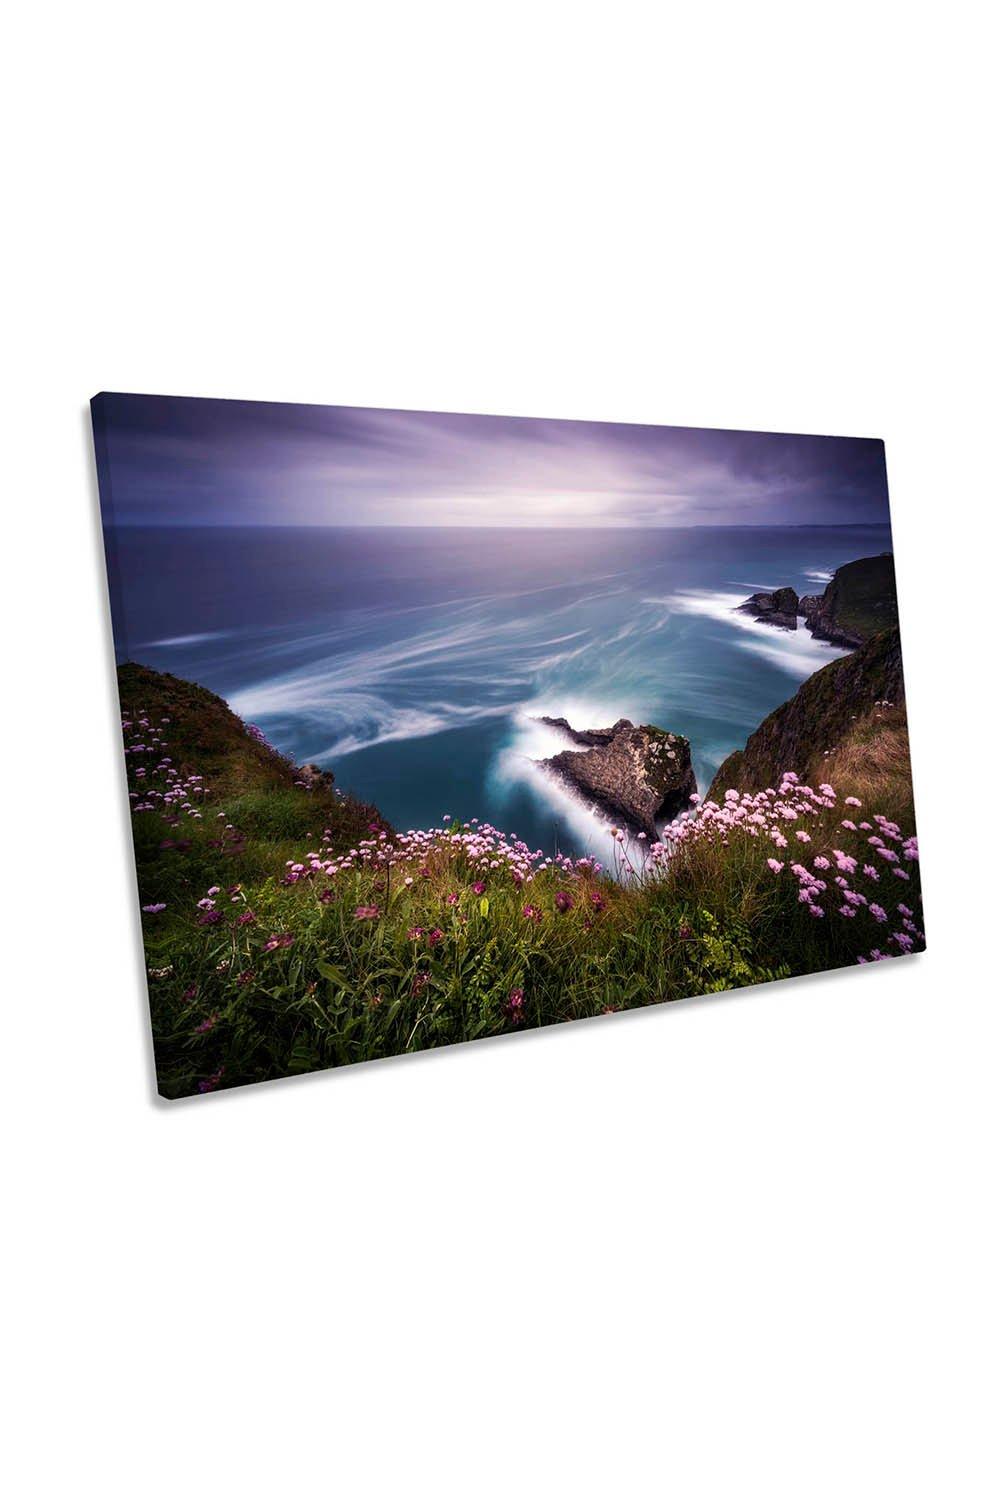 On the Edge of the Cliff Floral Seascape Canvas Wall Art Picture Print